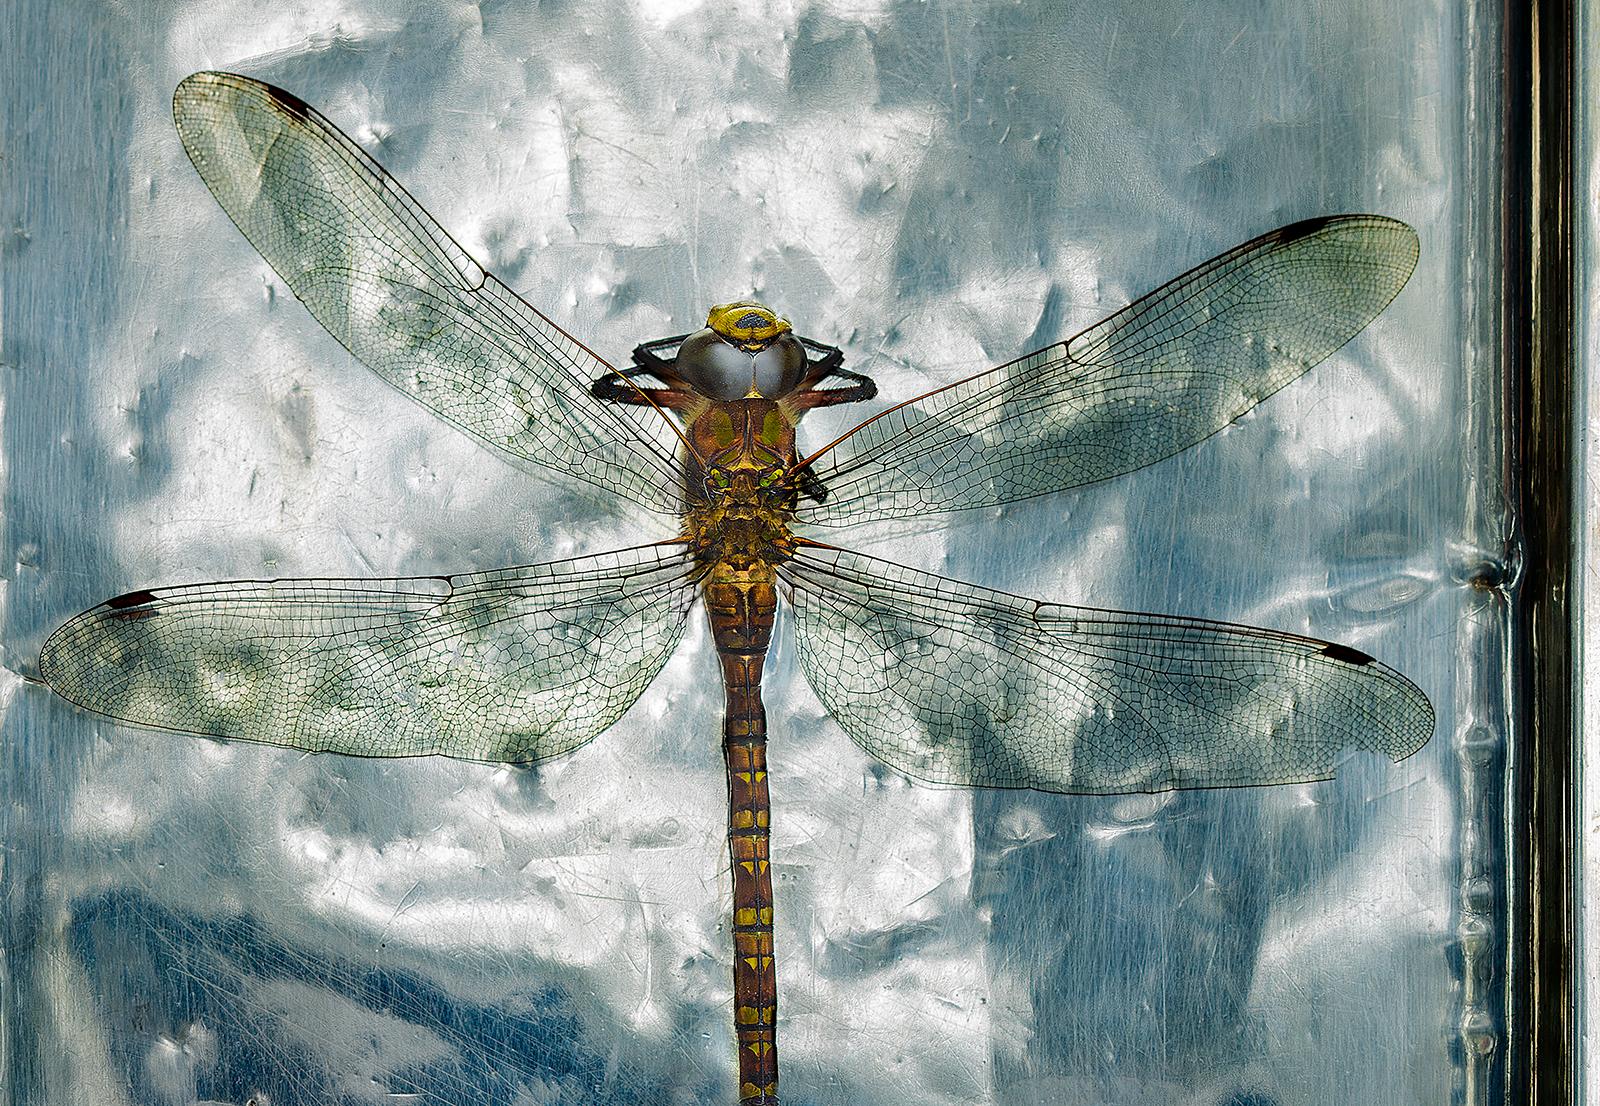 Dragonfly- Signed limited edition nature print, colour photo, Oversize still life - Photograph by Ian Sanderson